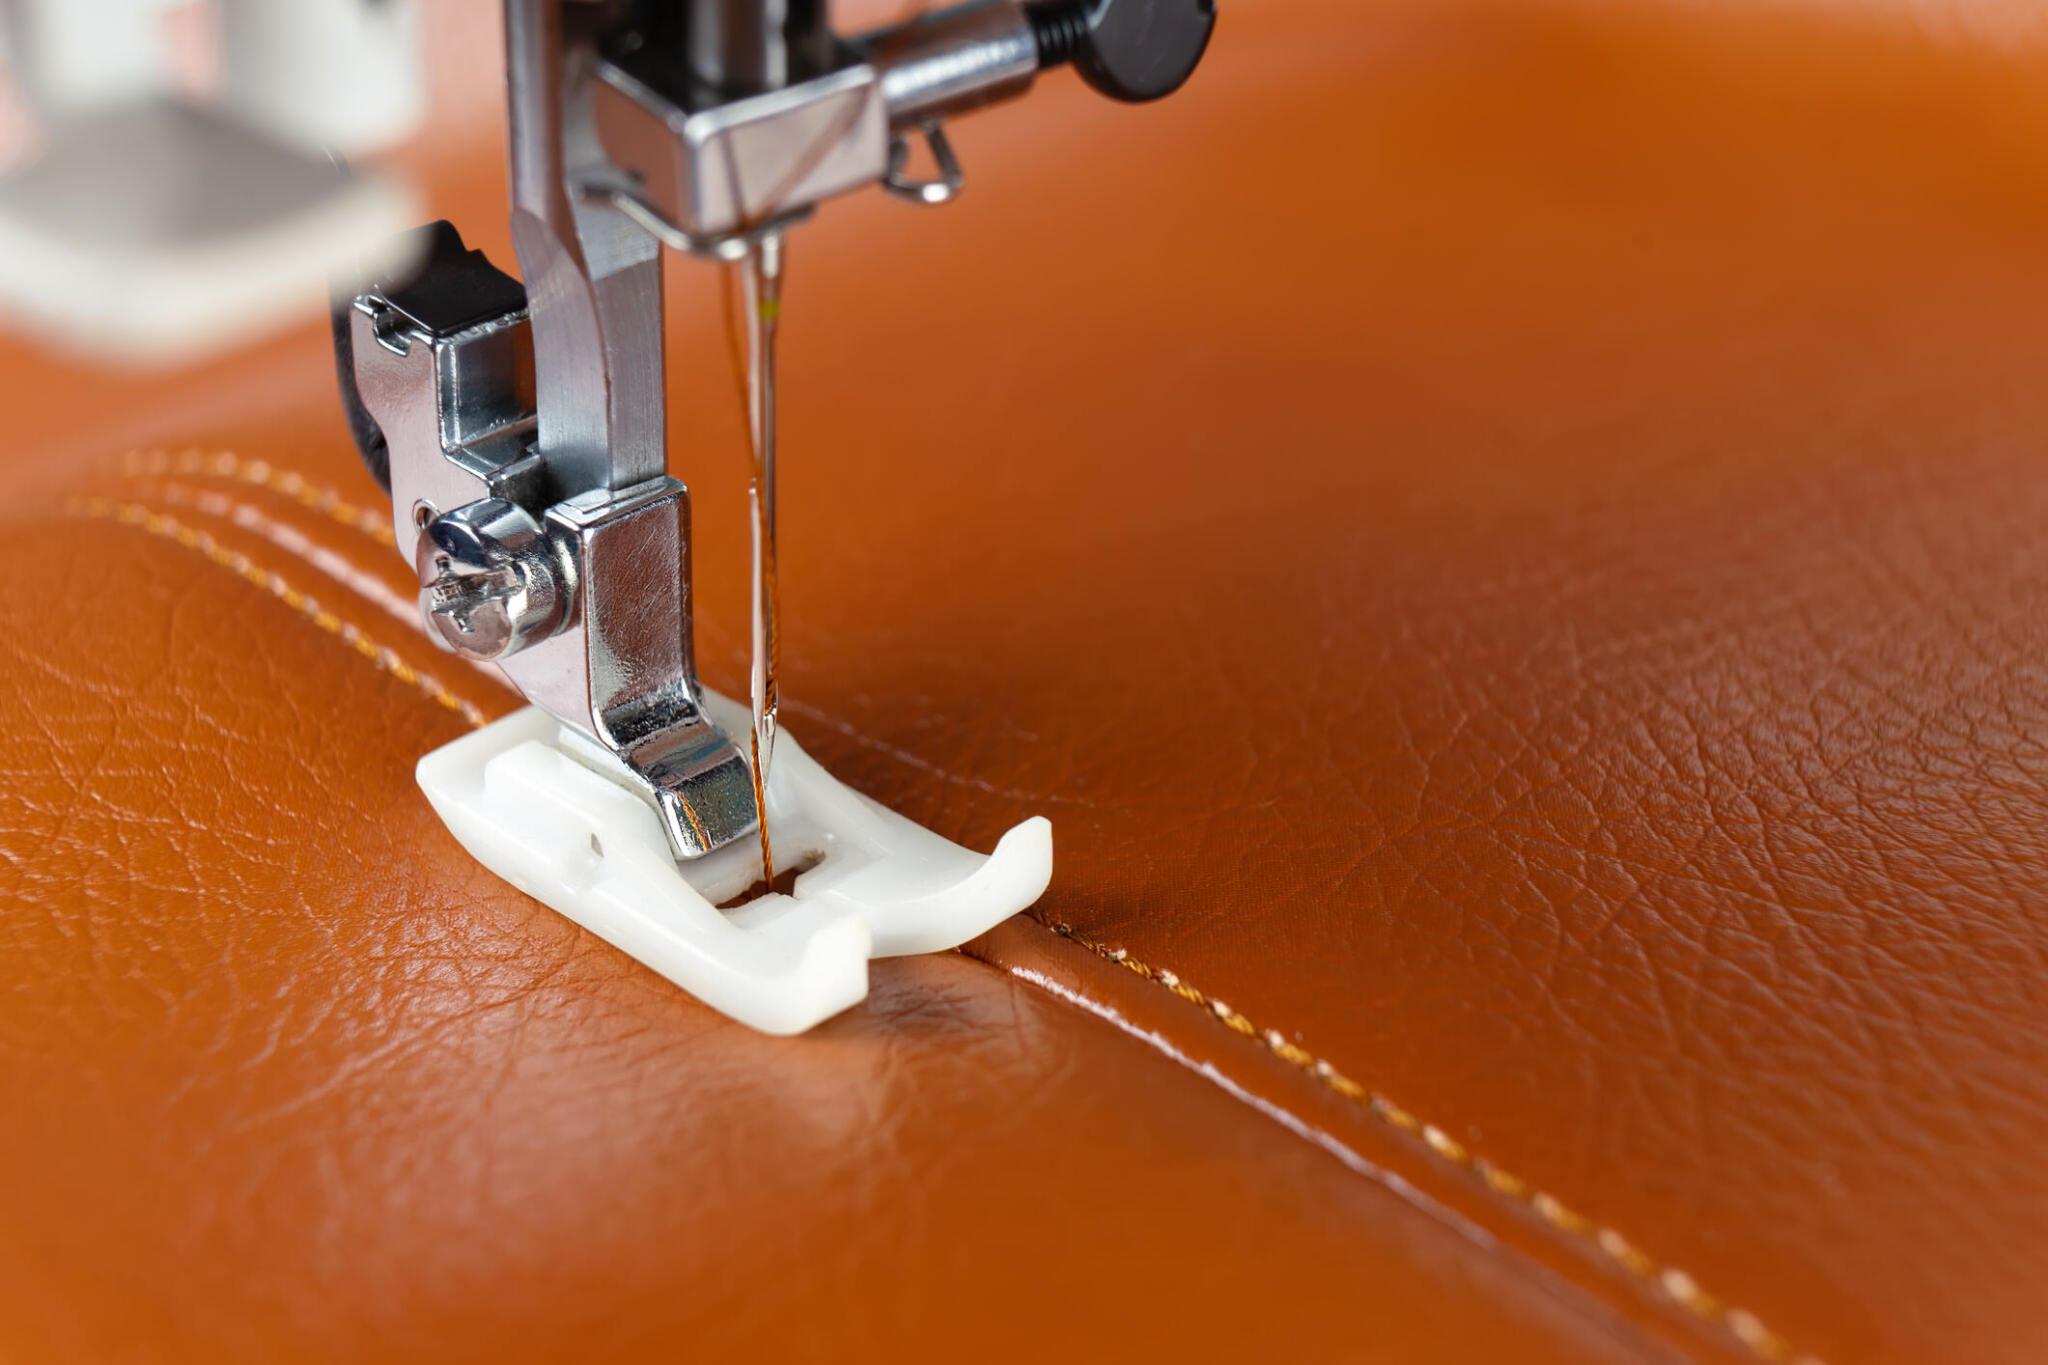 Machine Sewing Leather Step-by-Step Tutorial for Beginners